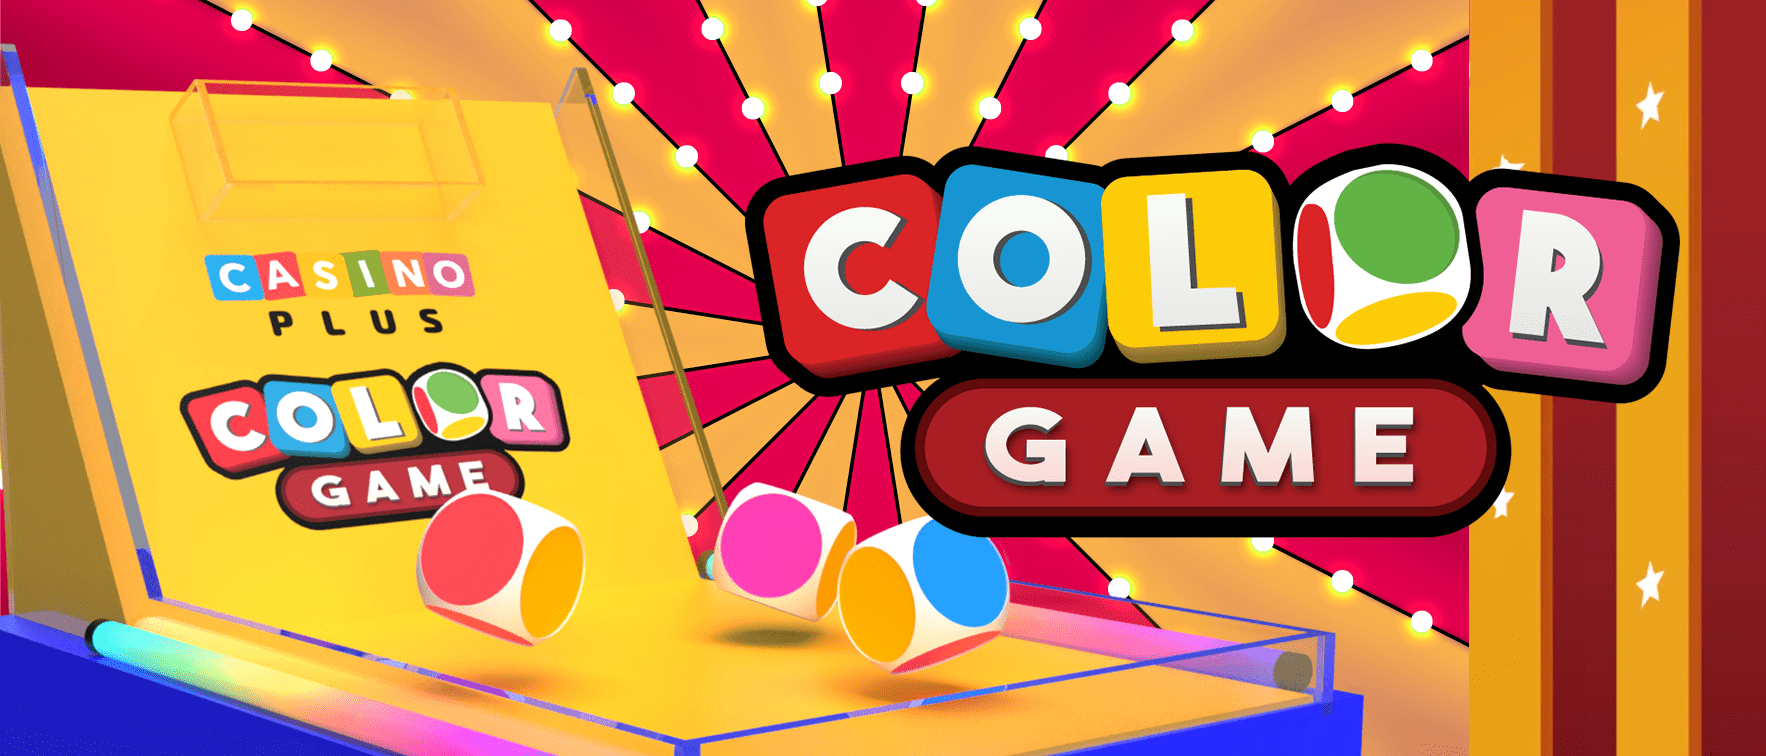 Casino Plus Color Game Betting Odds CG01-24070220 July 02 2024